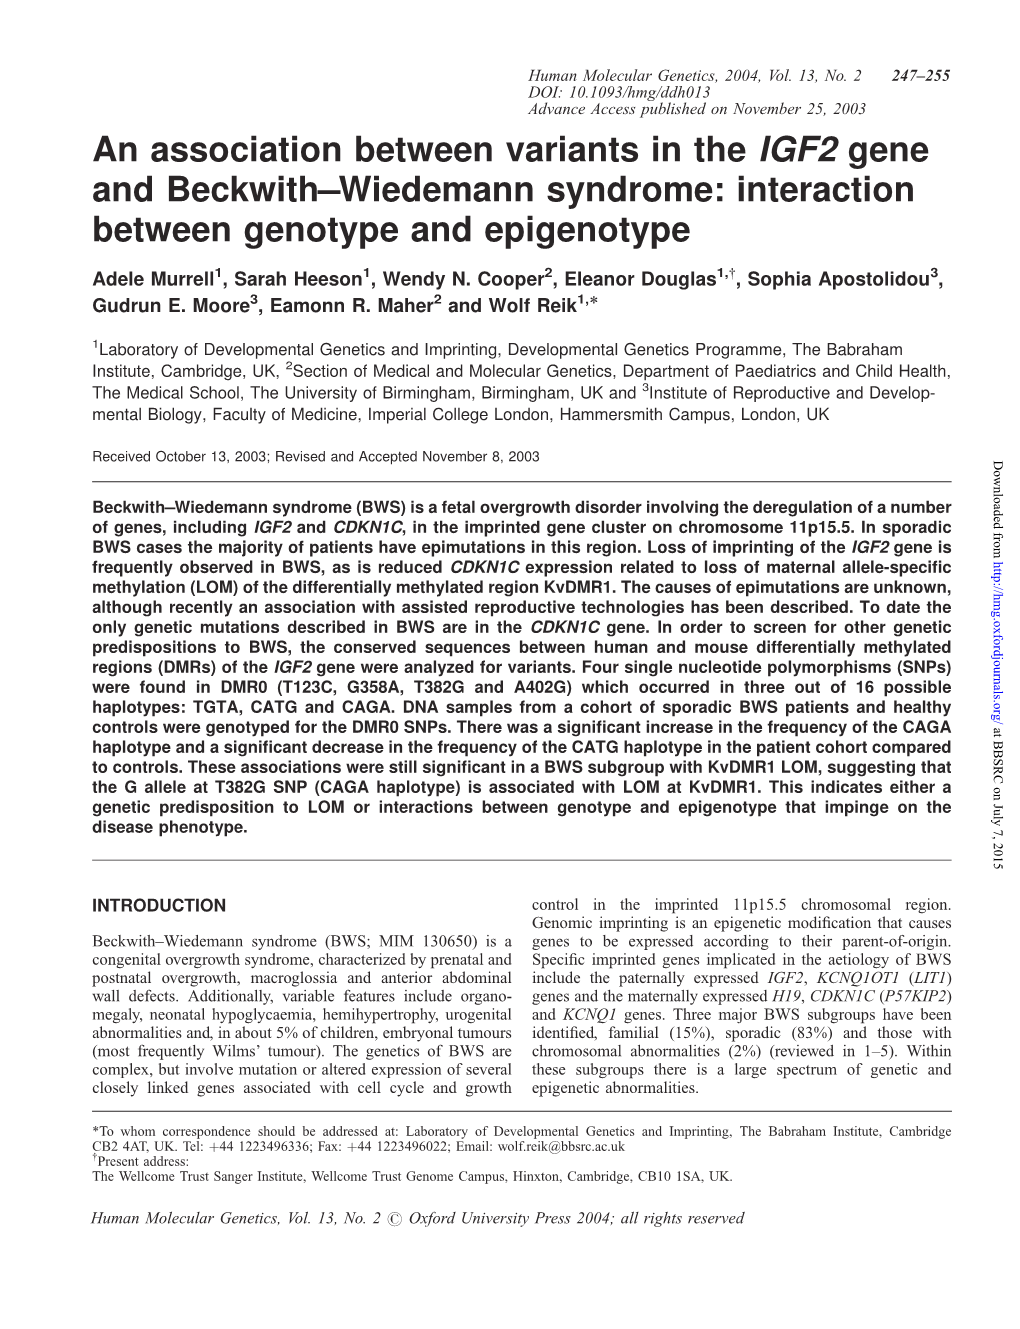 An Association Between Variants in the IGF2 Gene and Beckwith–Wiedemann Syndrome: Interaction Between Genotype and Epigenotype